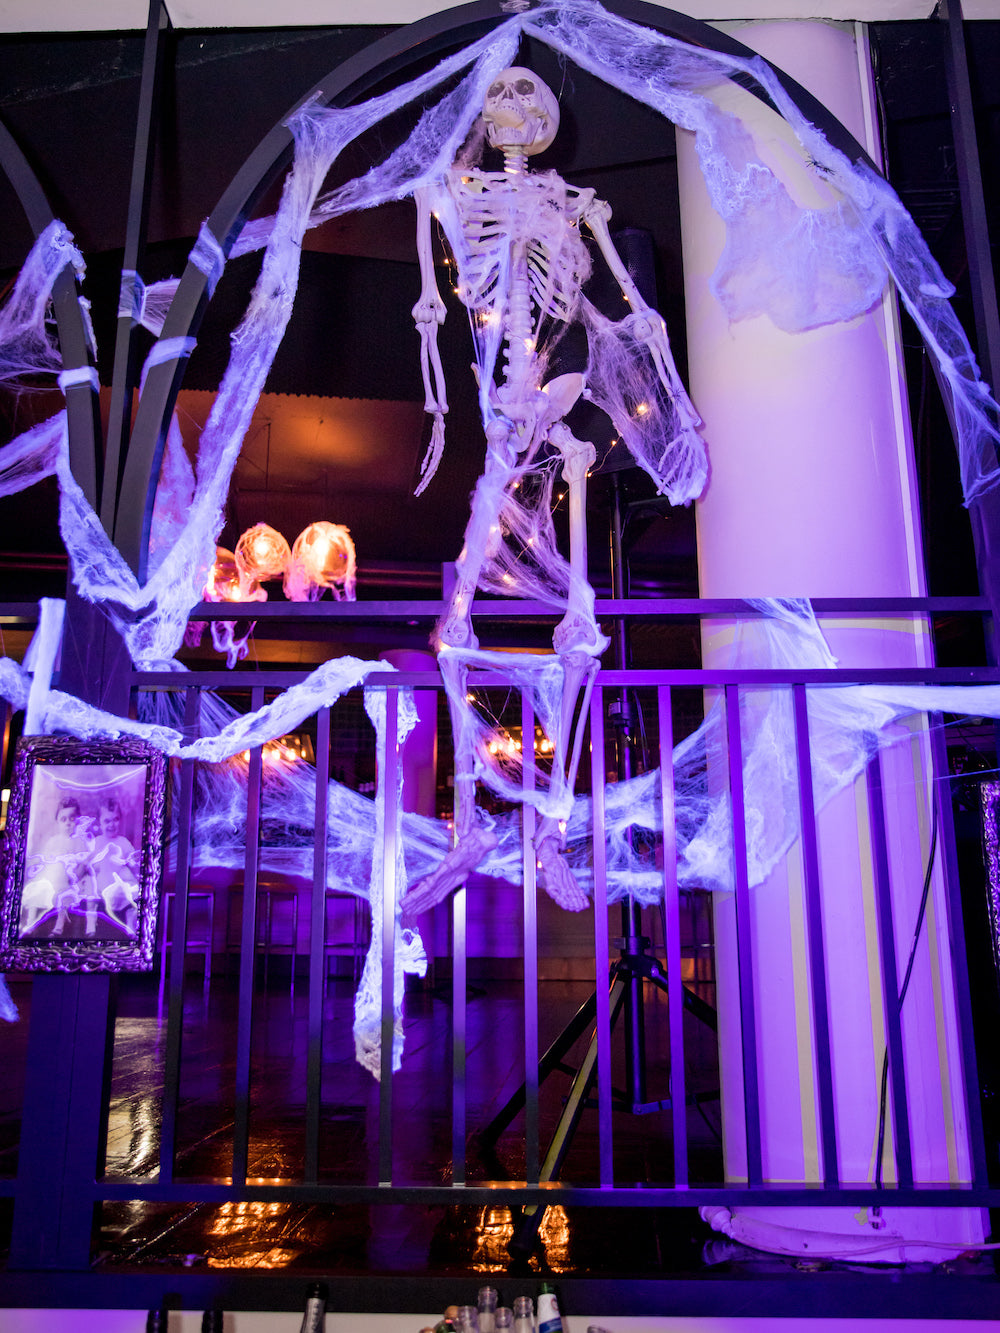 Halloween Ideas: Hanging Skeleton wrapped in web and spiders